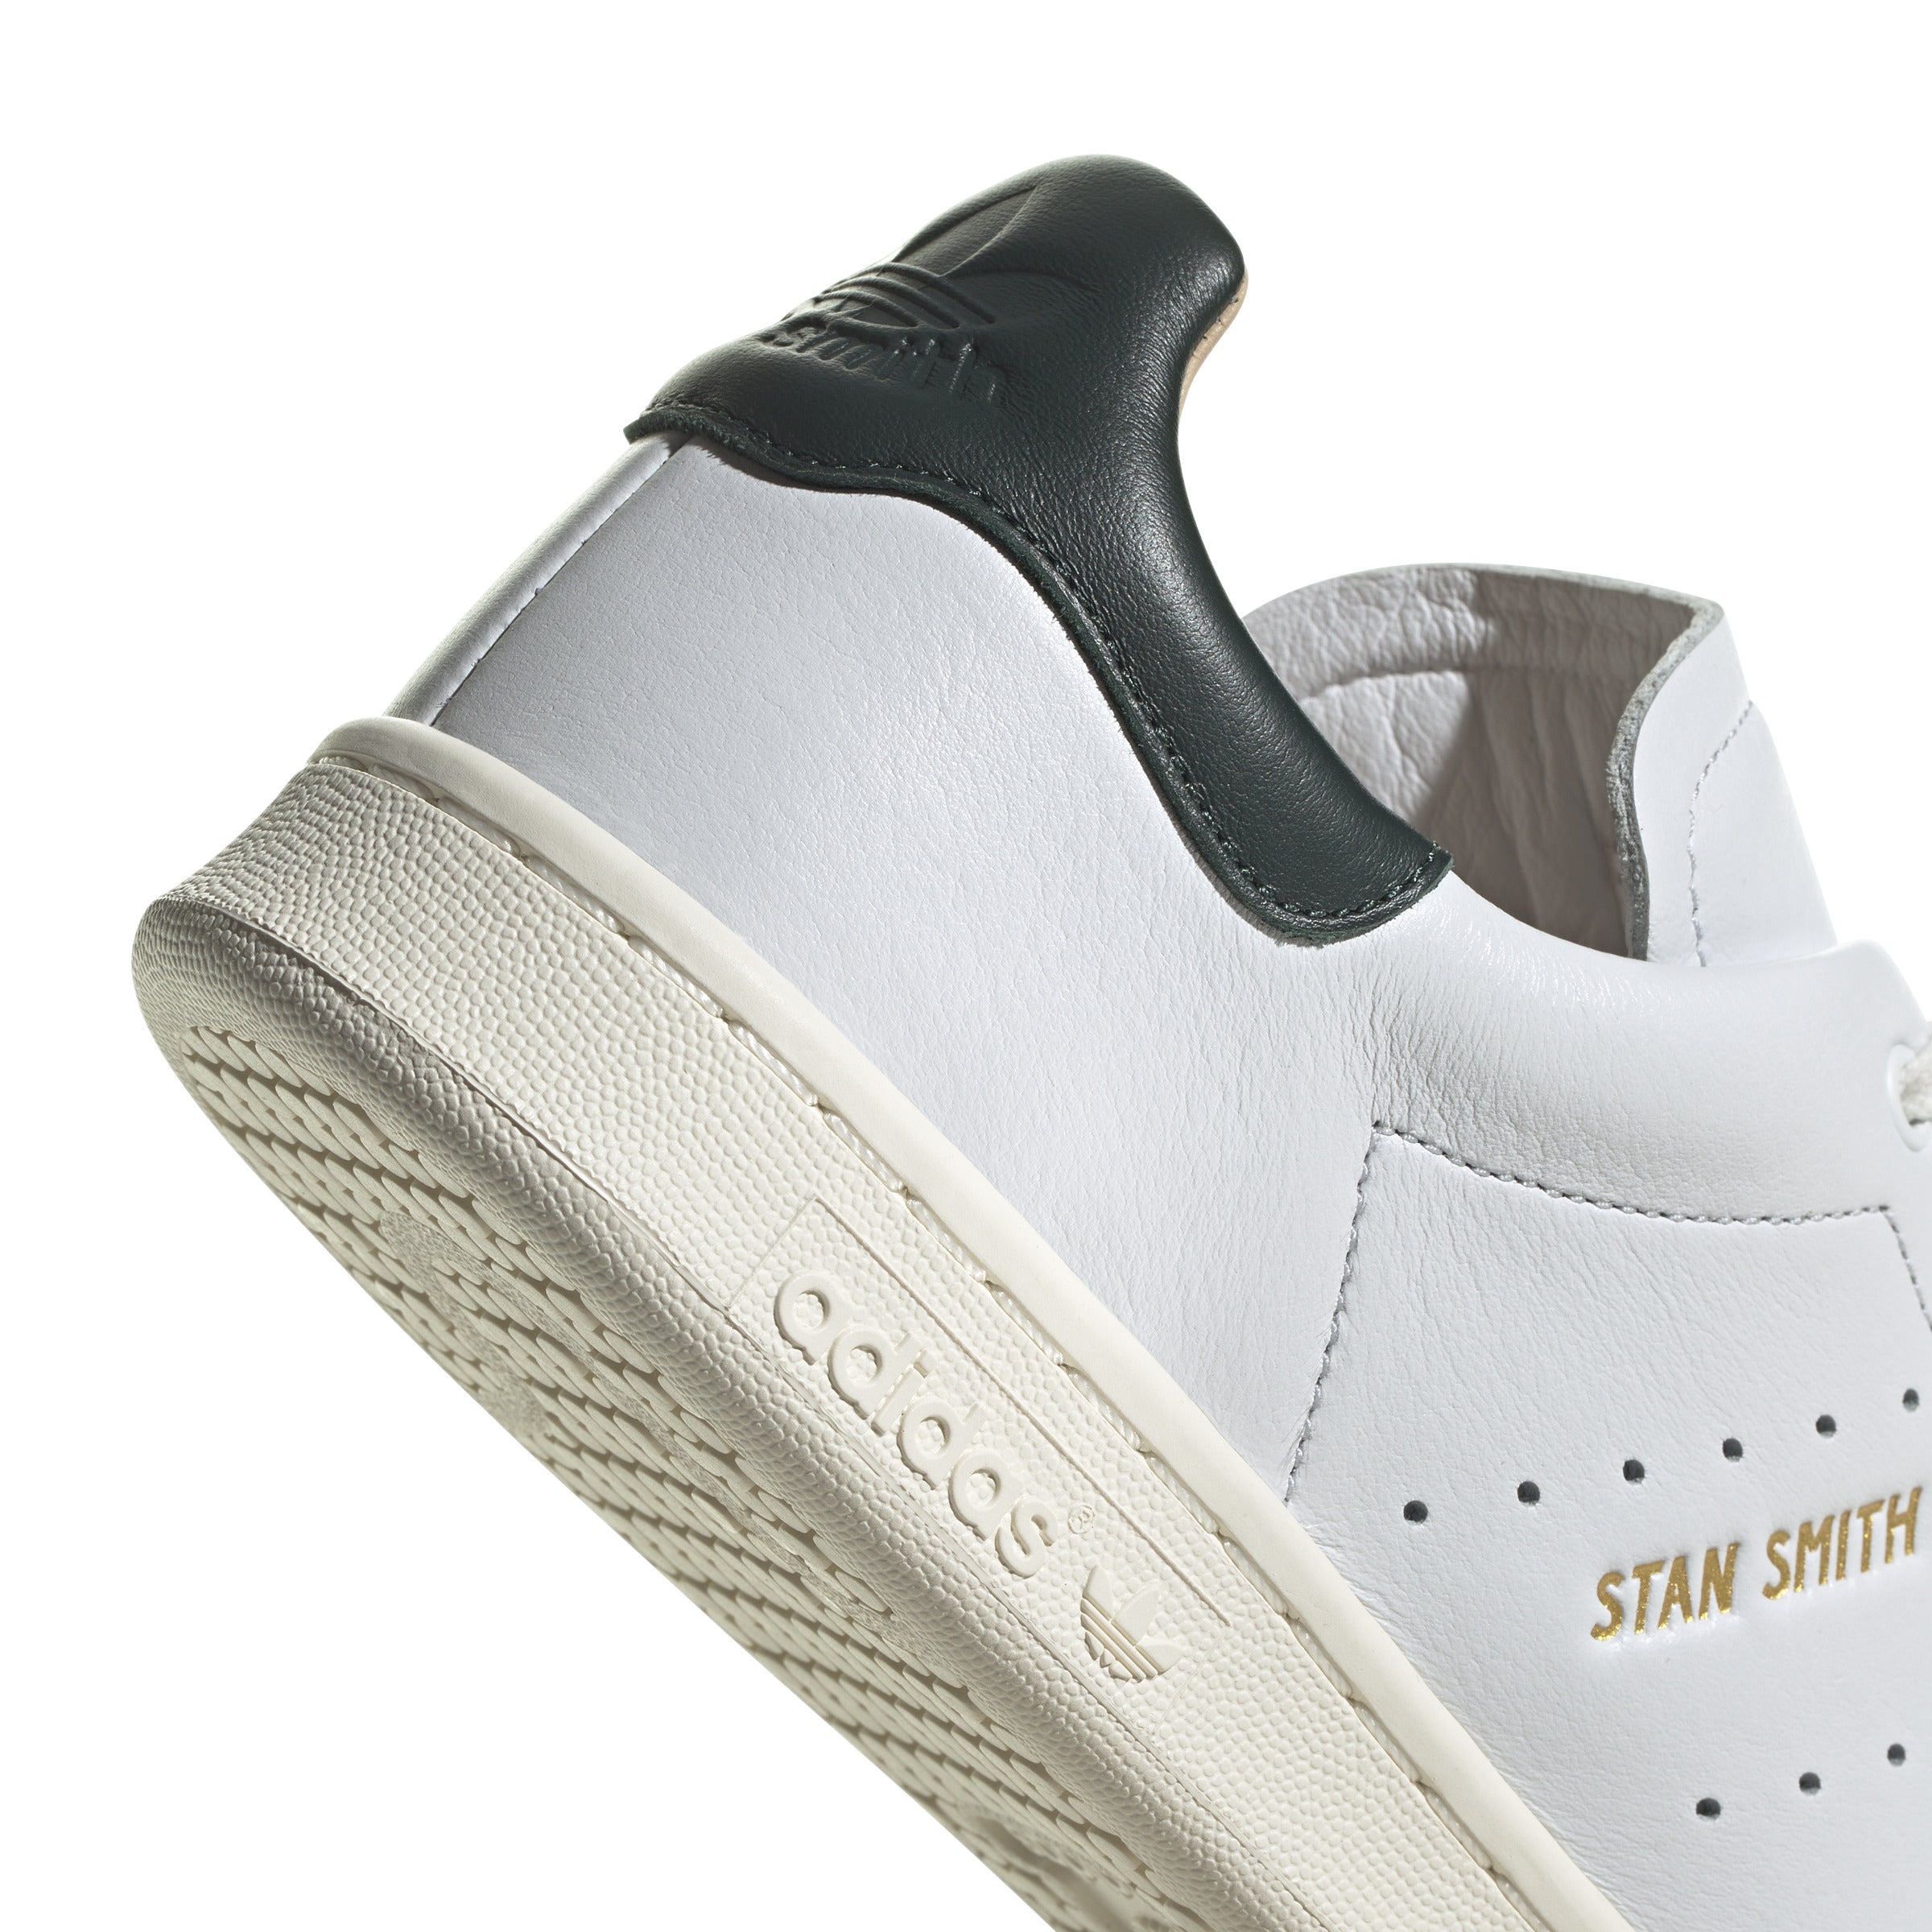 ADIDAS STAN SMITH LUX HP2201 SNEAKER (M)